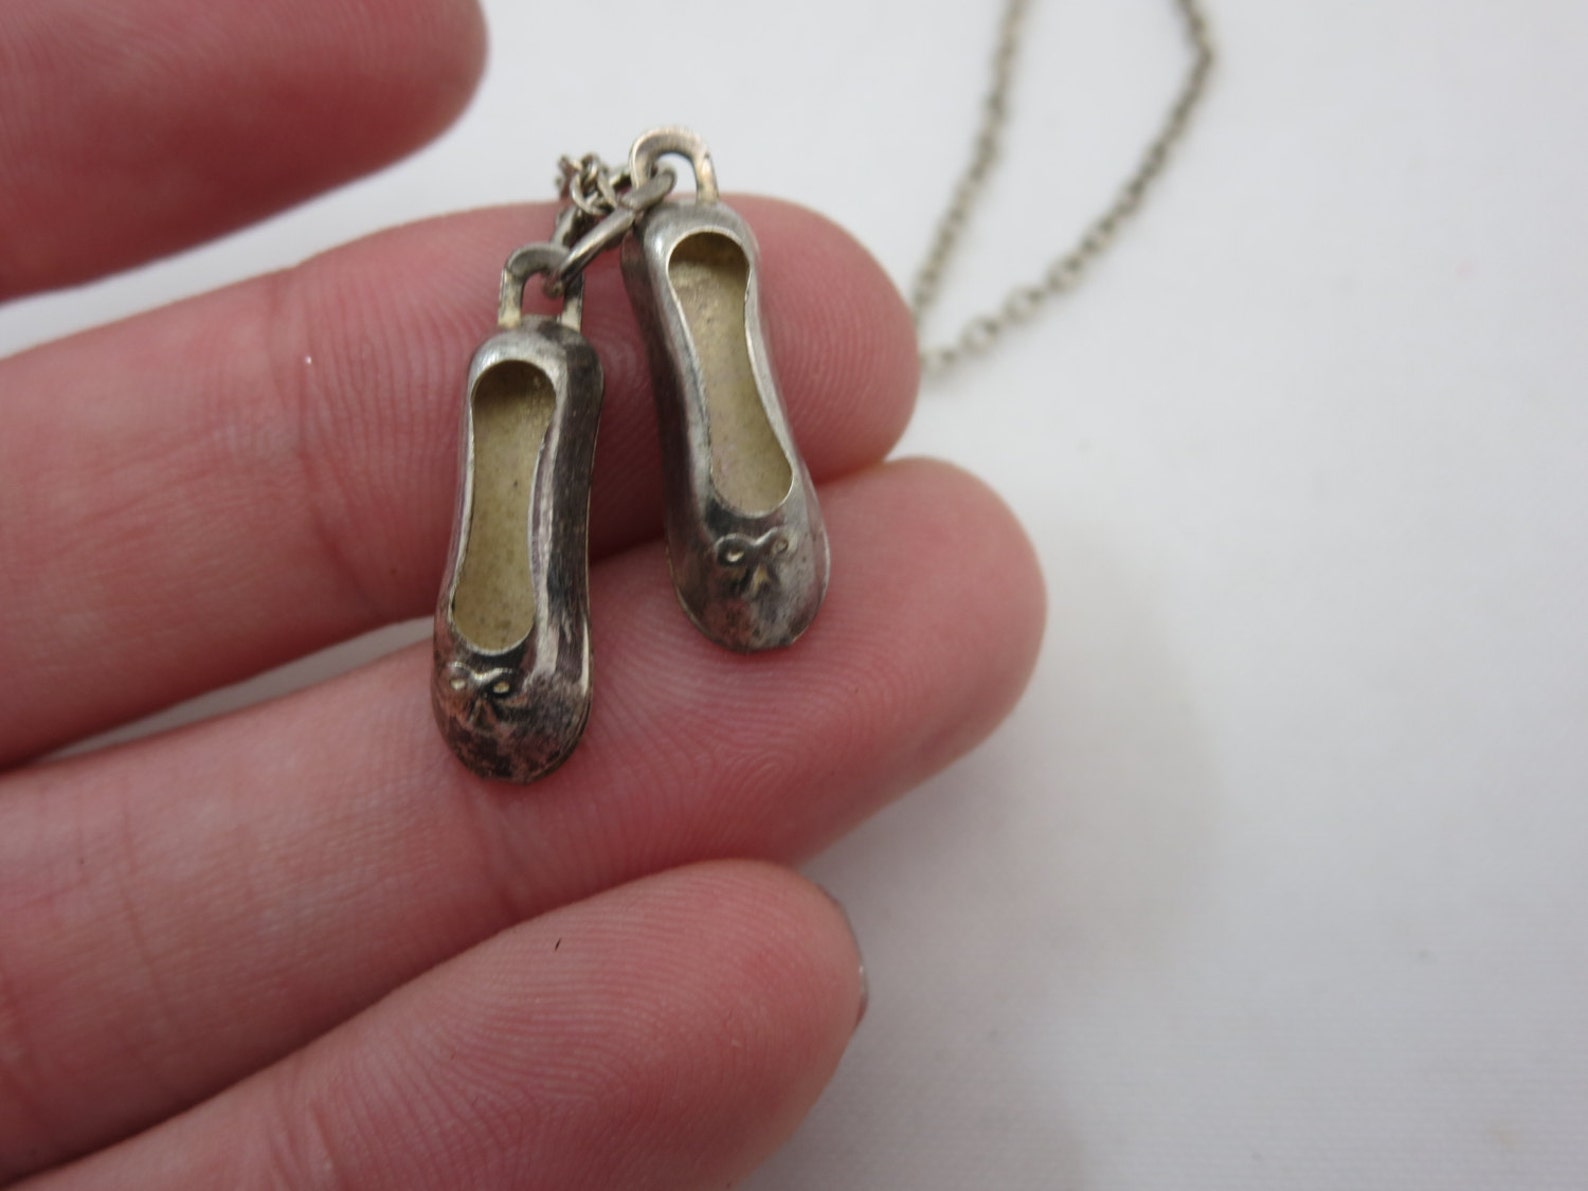 silver ballet slippers necklace pendant - costume jewelry, ballerina charm